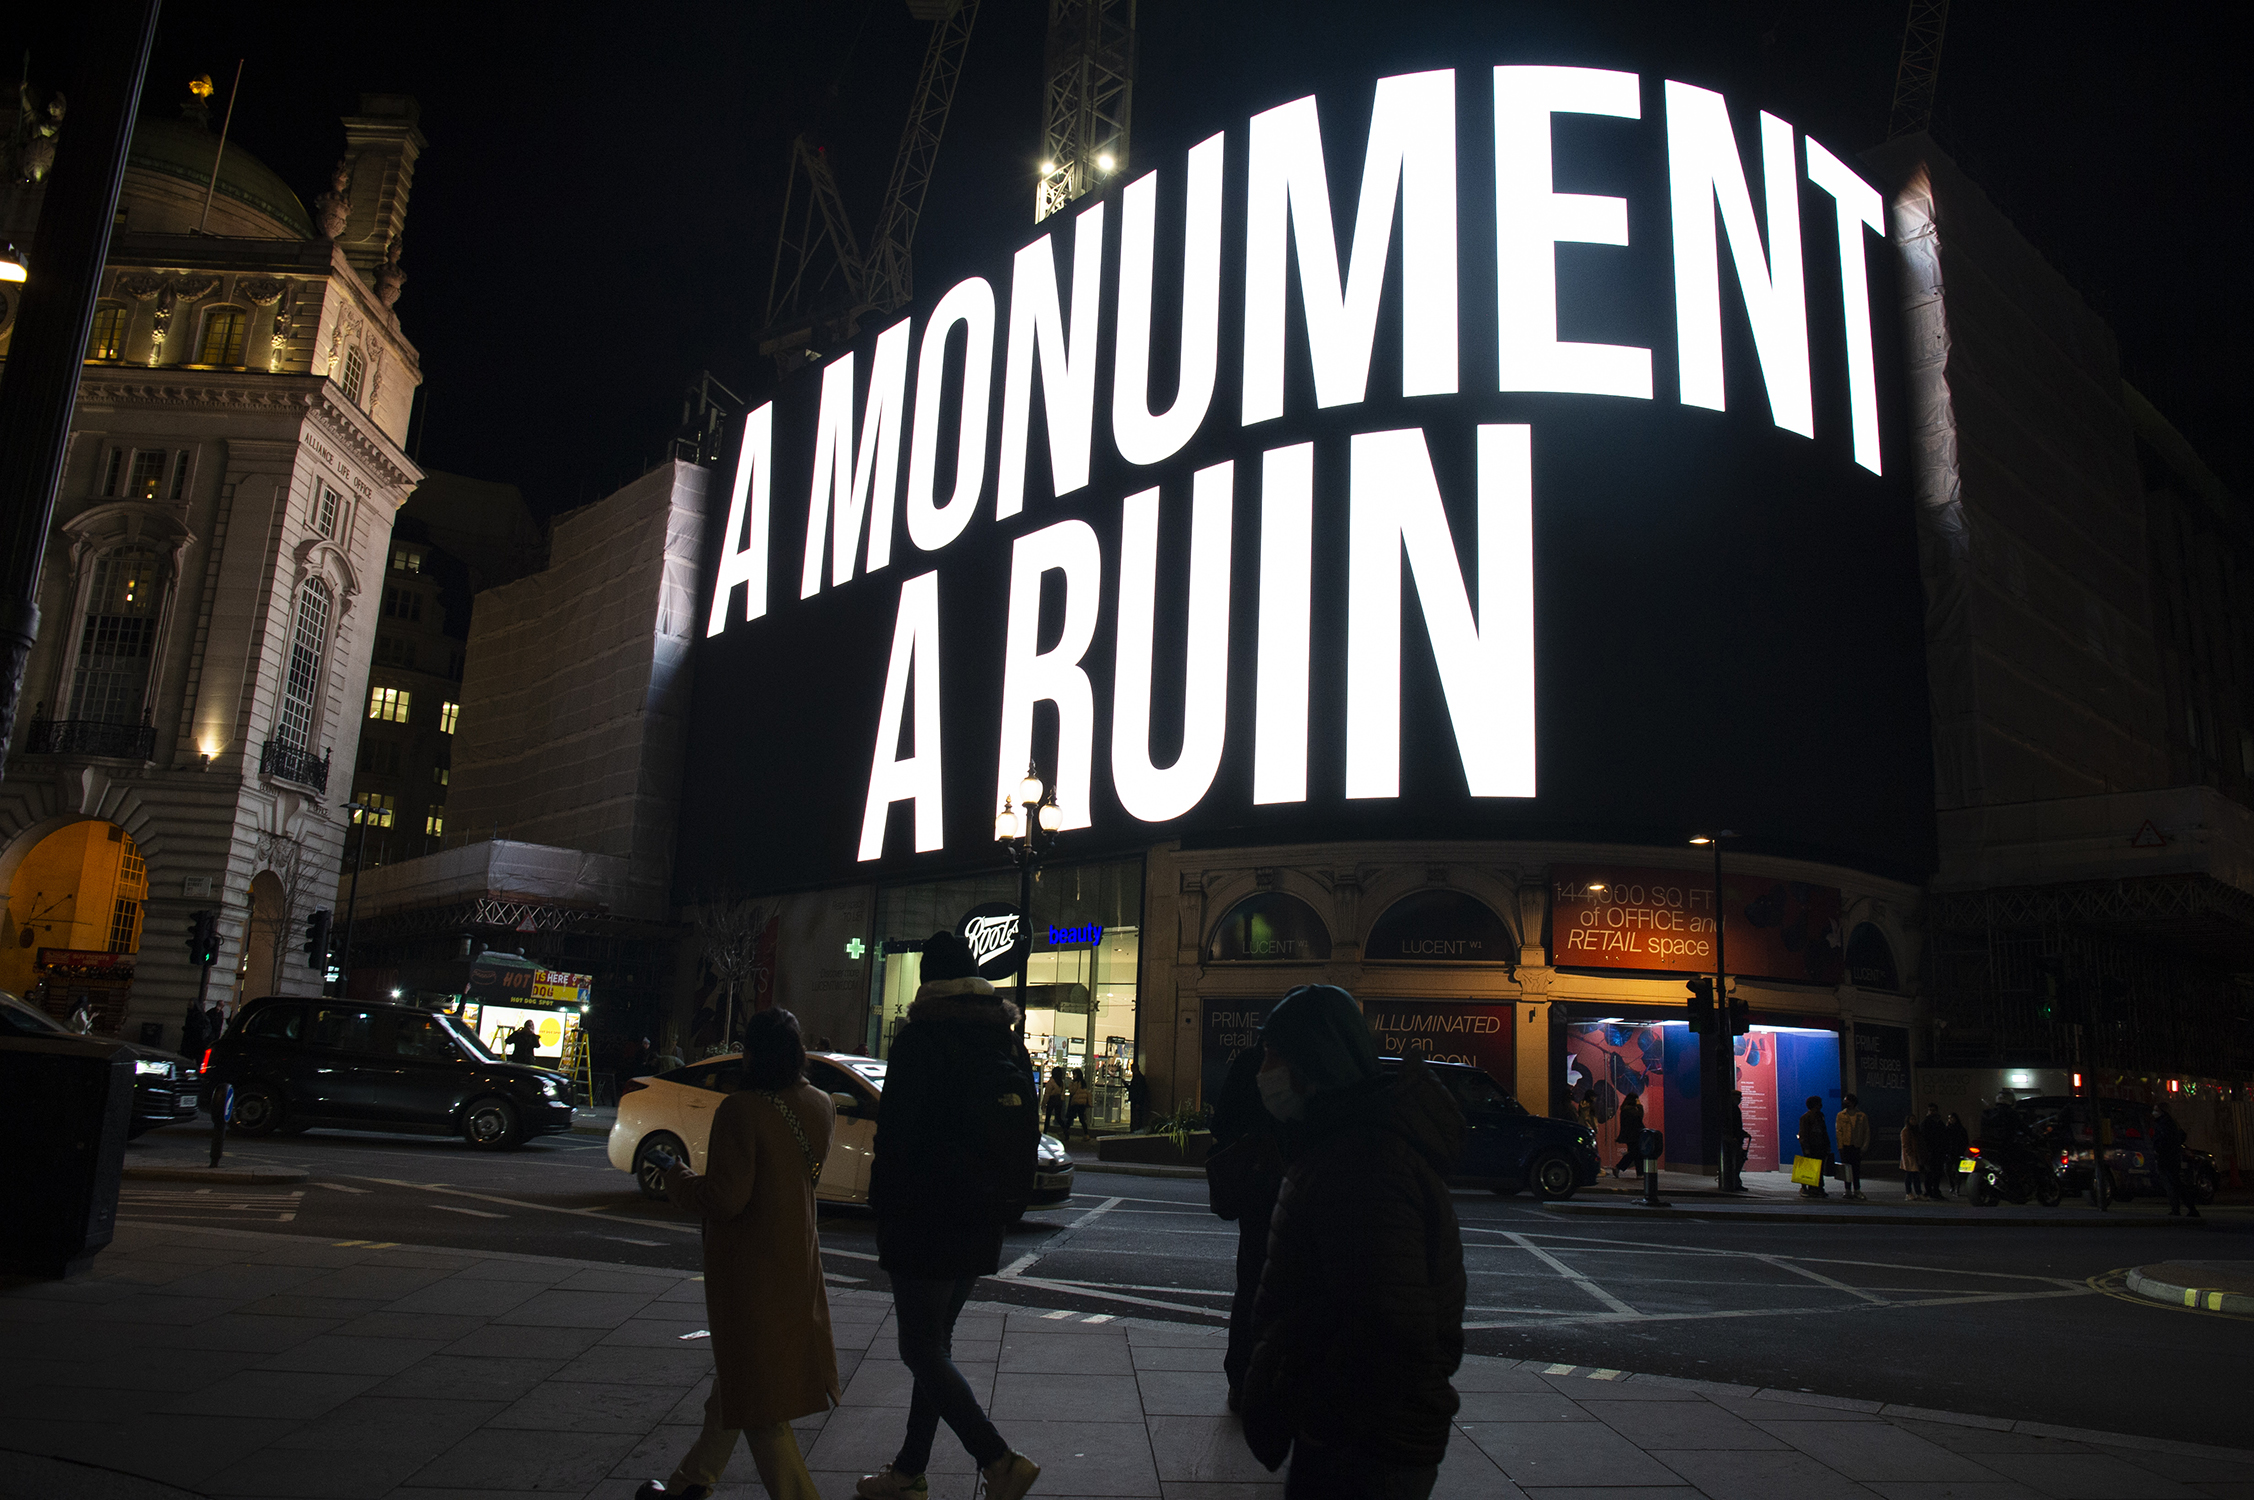 CIRCA and Pompeii Commitment present A Monument A Ruin by Cassandra Press, 2022 London, Piccadilly Lights © CIRCA 04